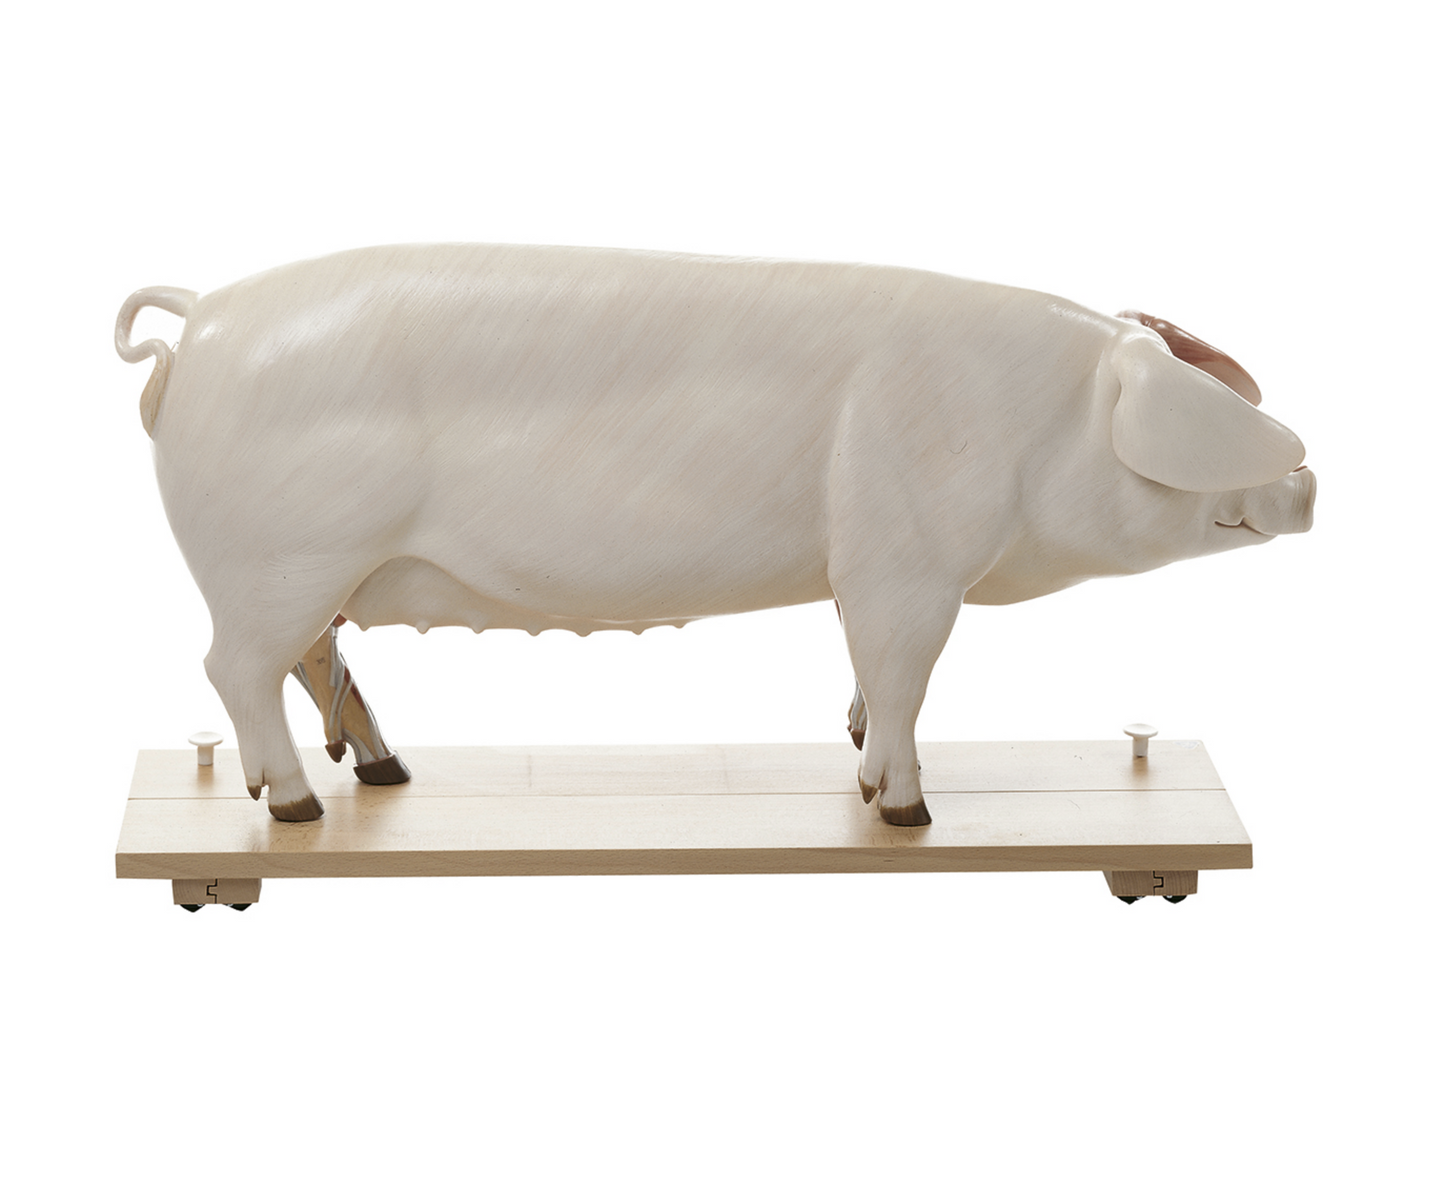 Breeding pigs of the highest quality and approximately half natural size. Can be separated into 17 parts